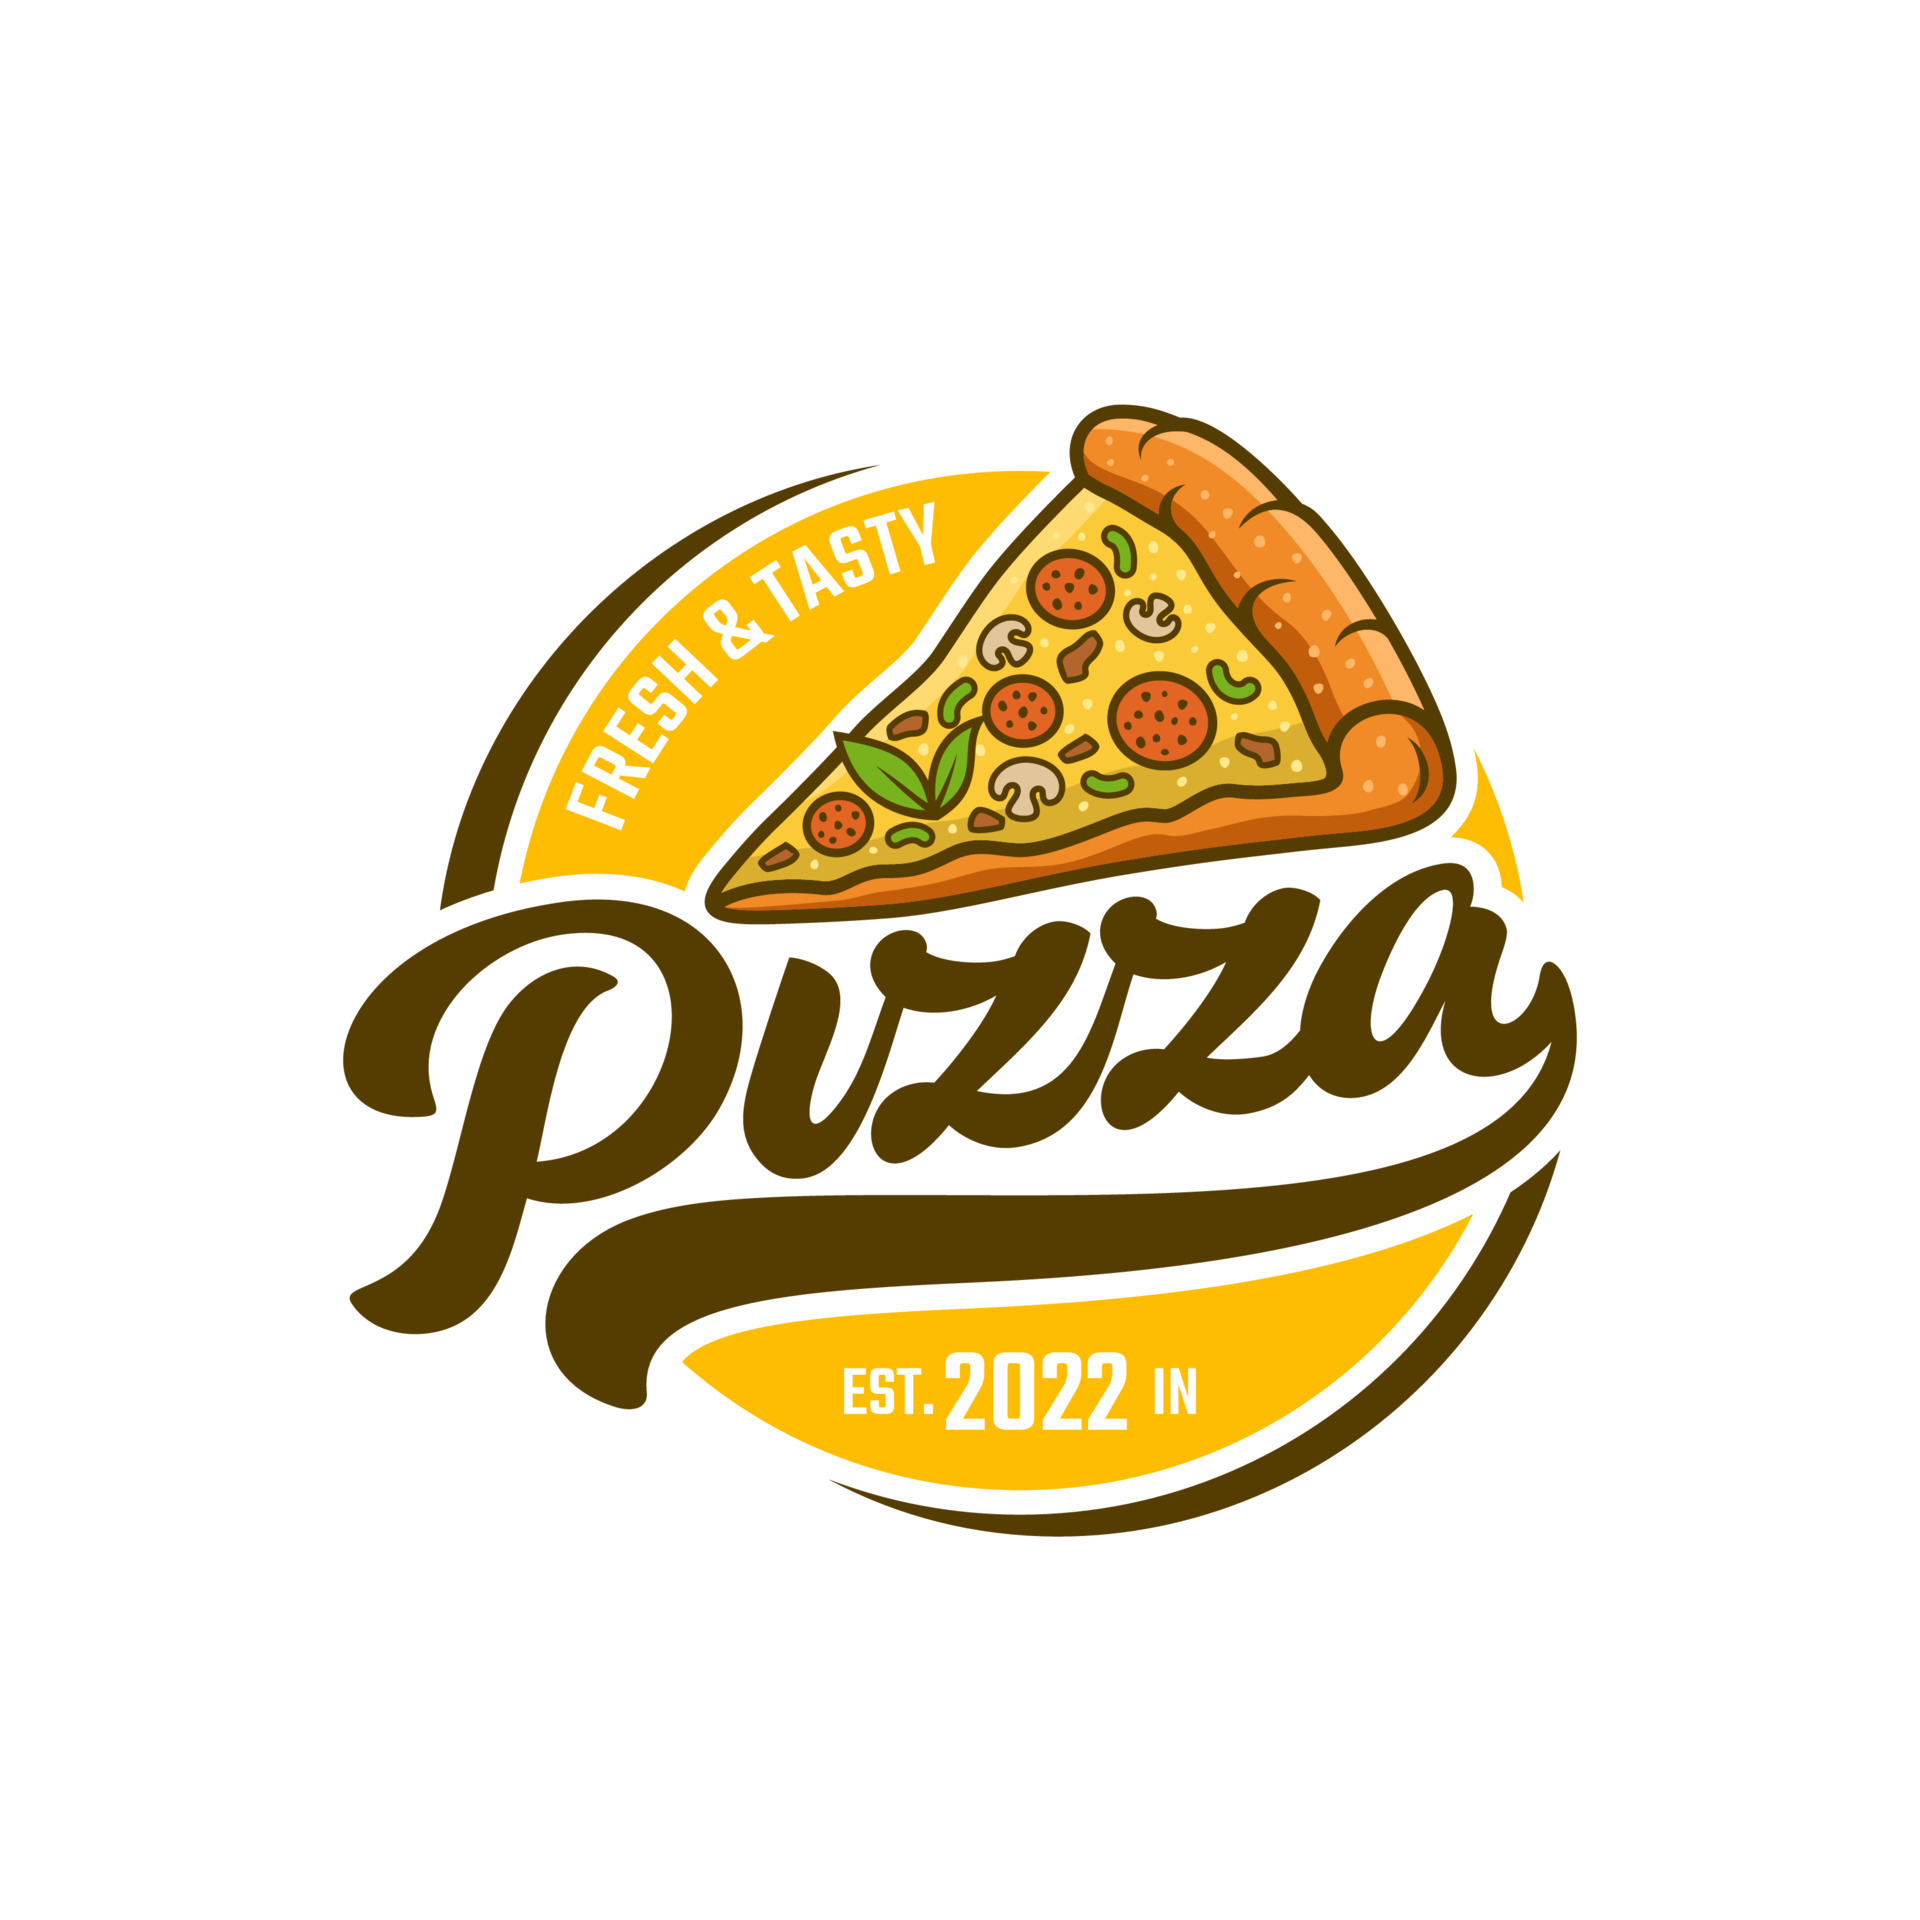 Simple yellow and black pizza logos for delivery, bakery, product